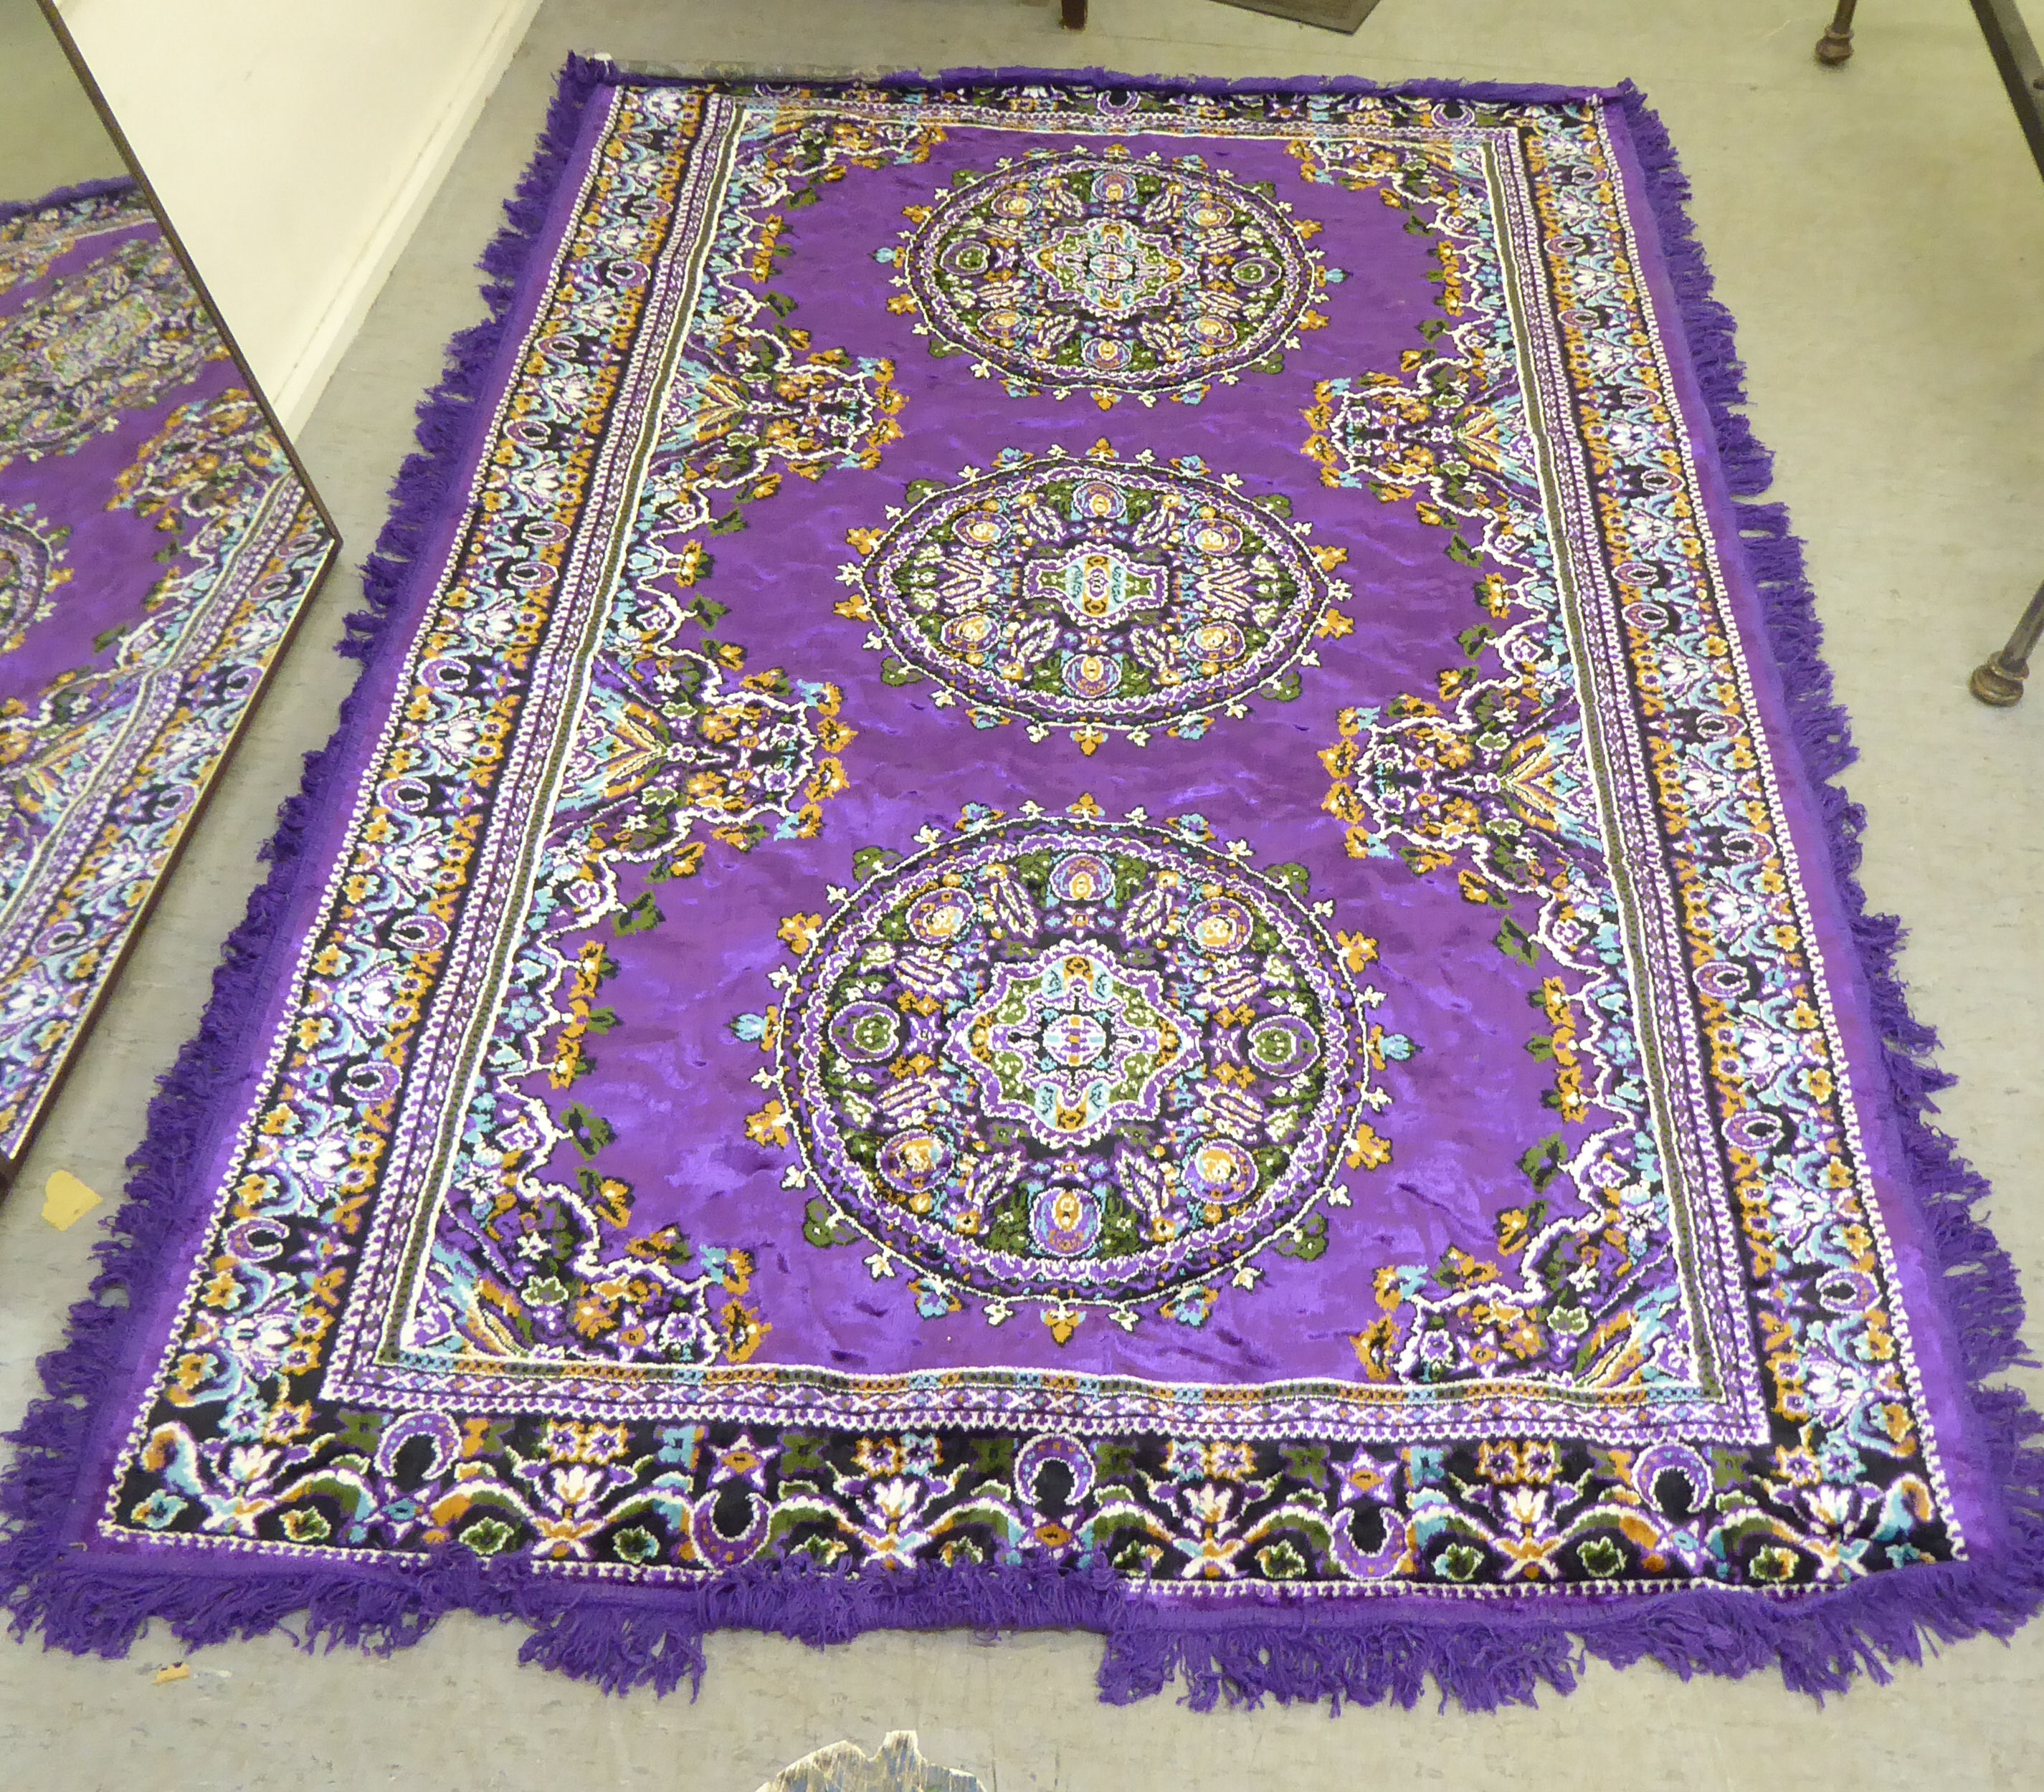 A Persian design rug, decorated with floral motifs, on a purple ground  86" x 56"